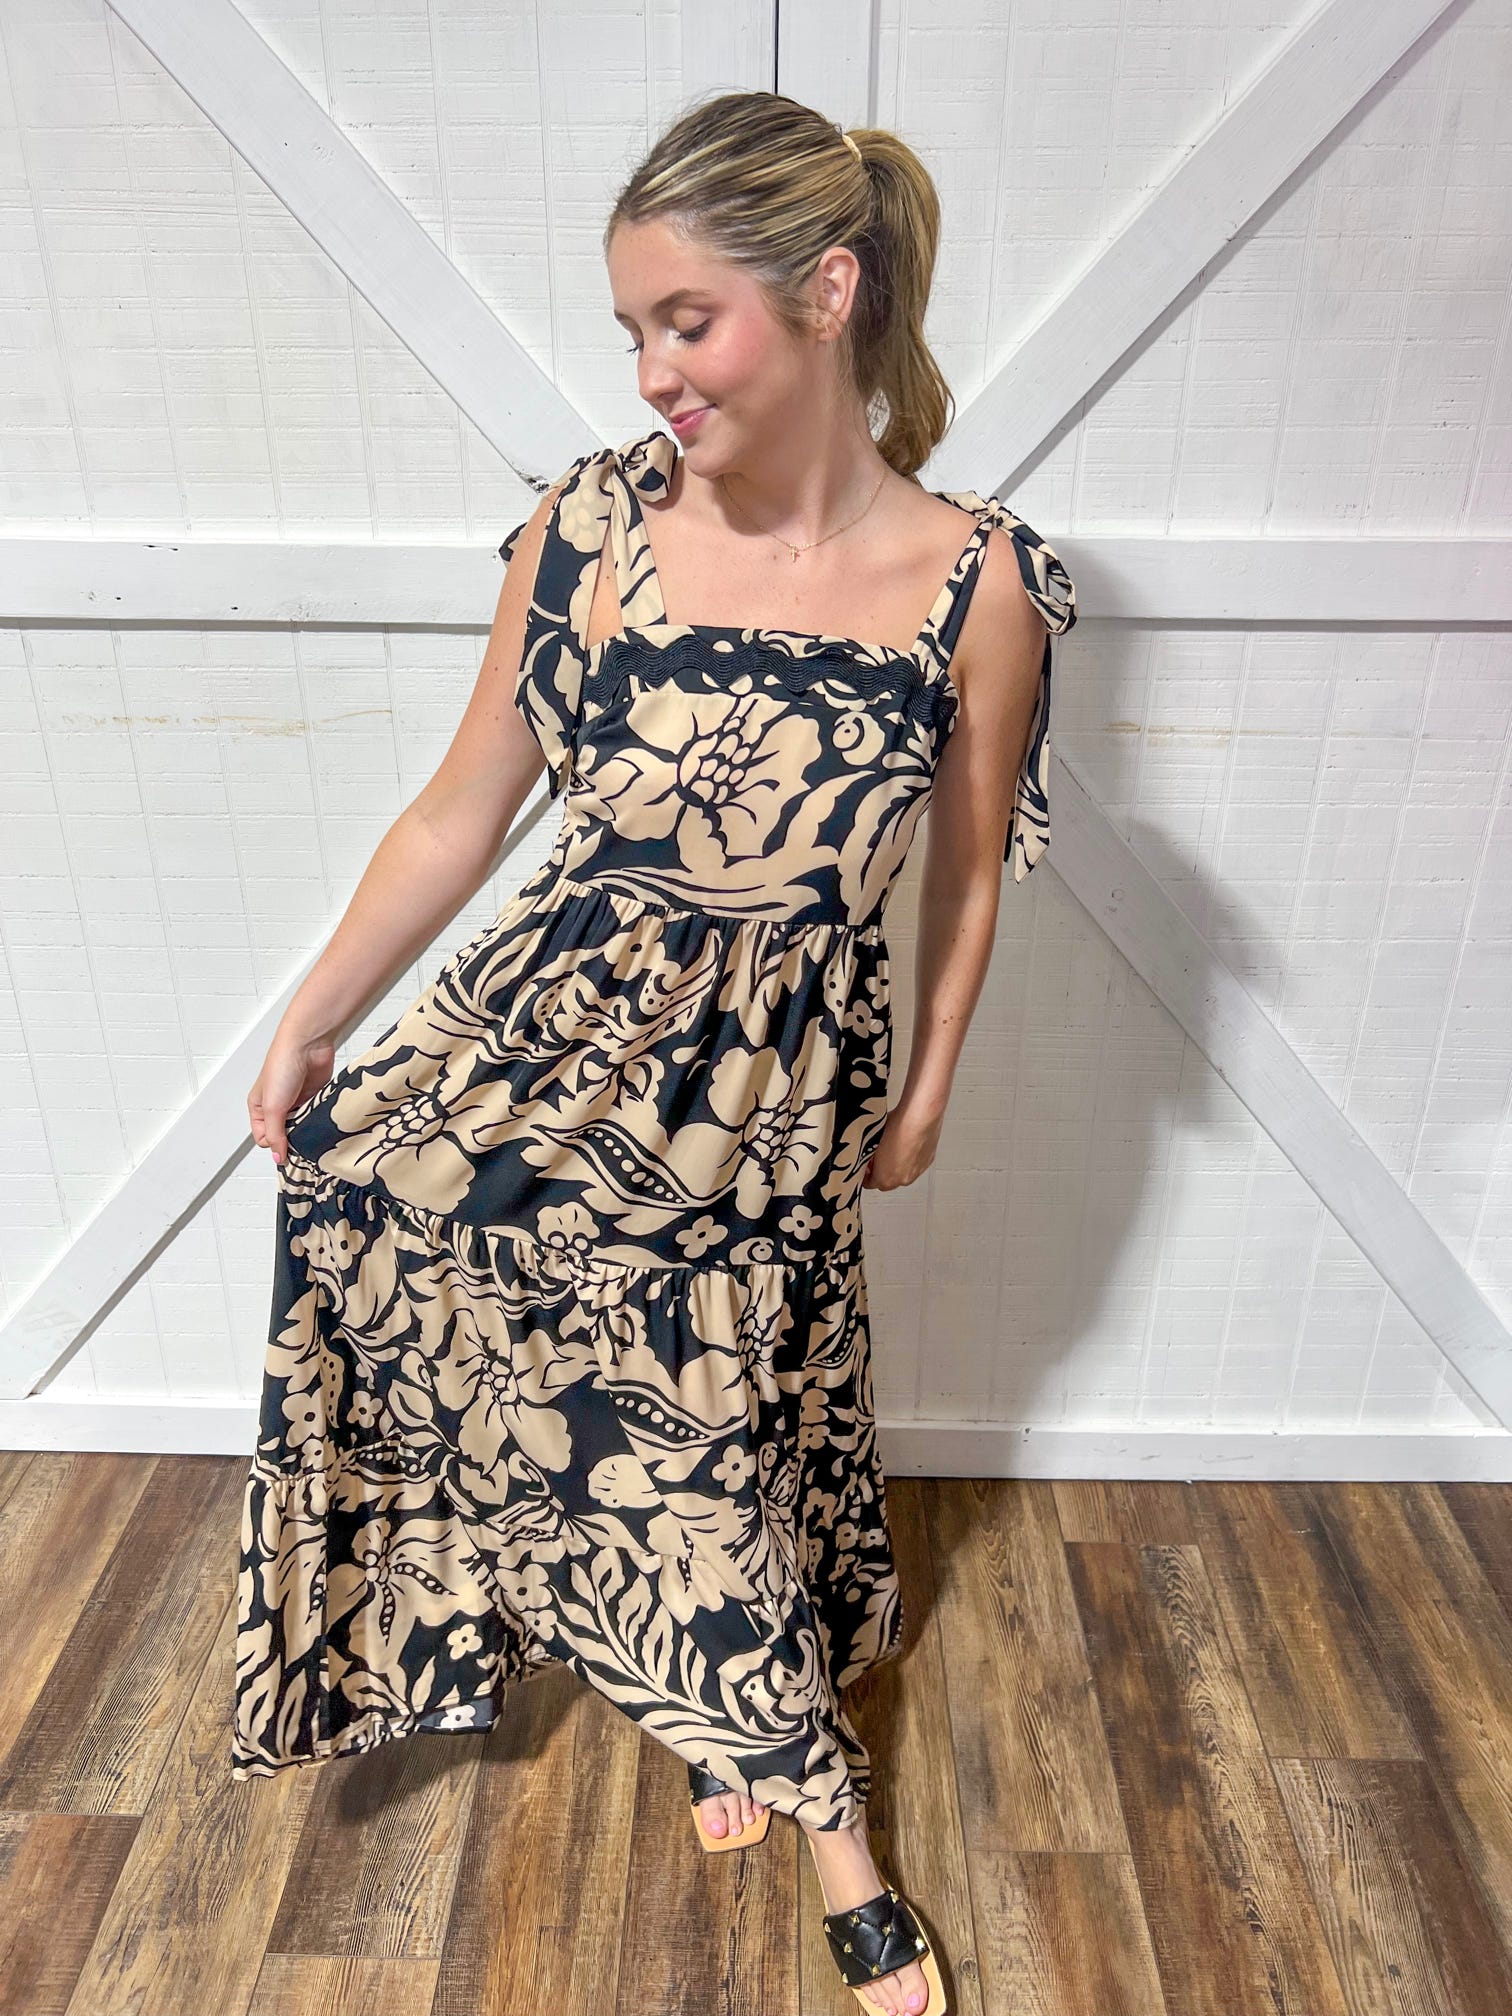 Black and beige floral print maxi dress that ties at the shoulders